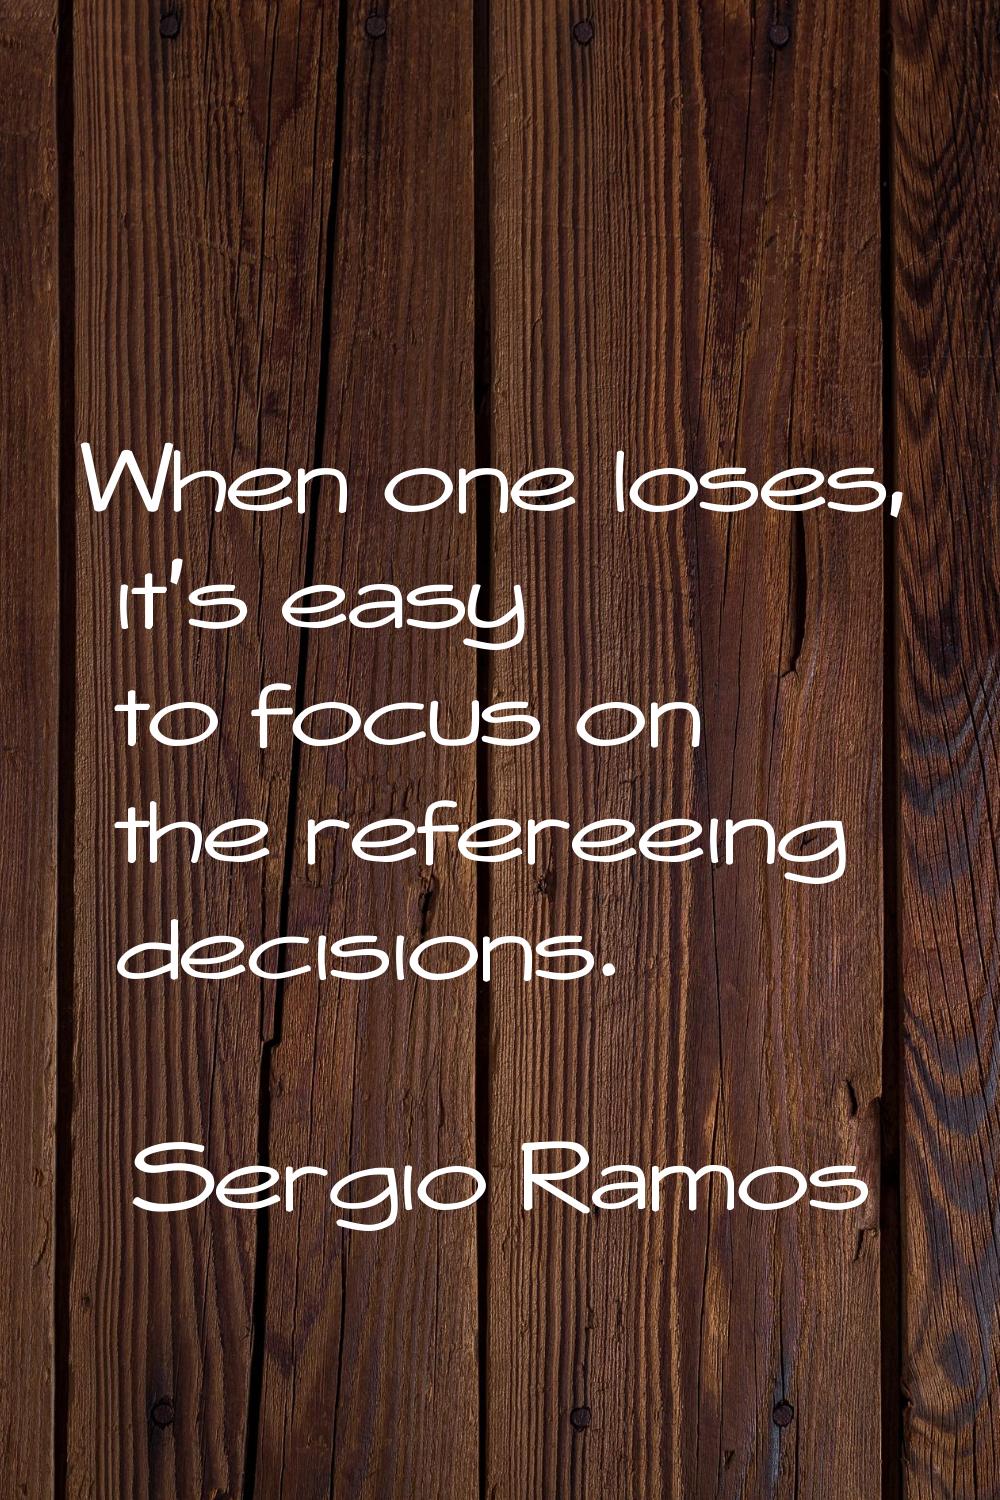 When one loses, it's easy to focus on the refereeing decisions.